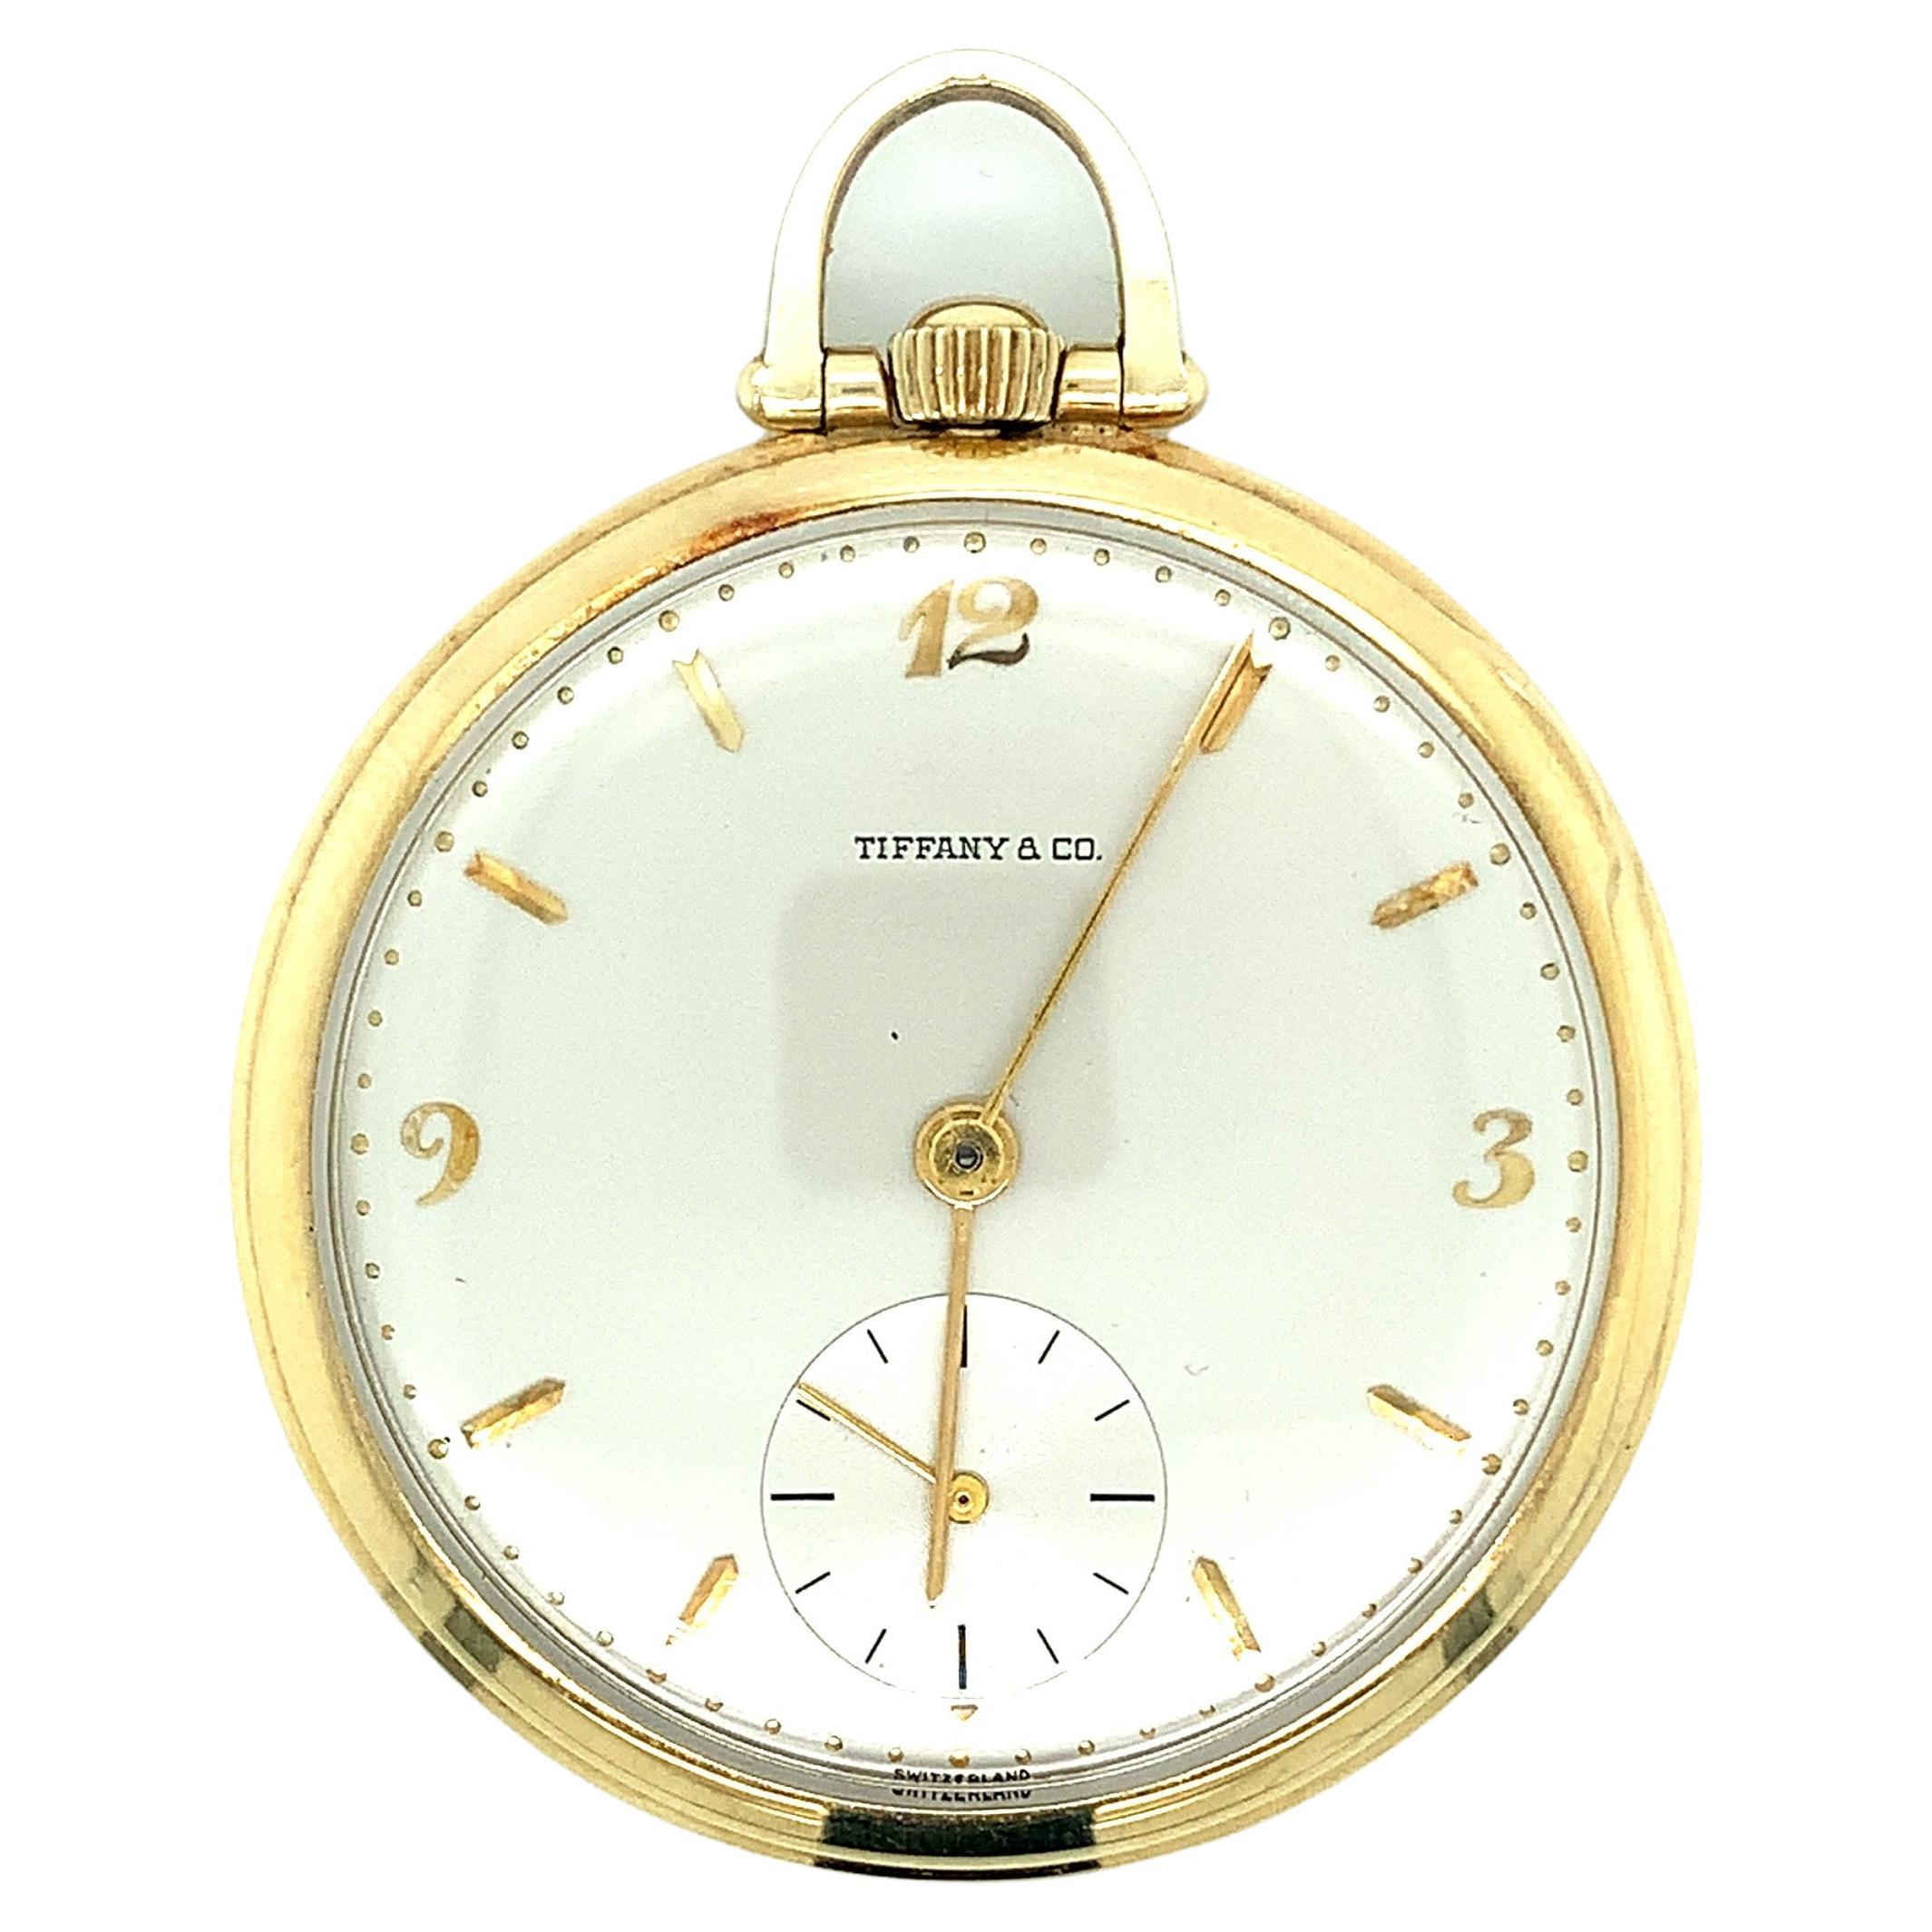 Tiffany & Co. 14 karat yellow gold pocket watch, with Movado movement. Made in Switzerland. Serial no. 550273. Marked: Tiffany & Co. / Swiss made / 17 Seventeen Jewels Unadjusted / Movado Factories / USA Movado / 14 karat gold / 550273. Total